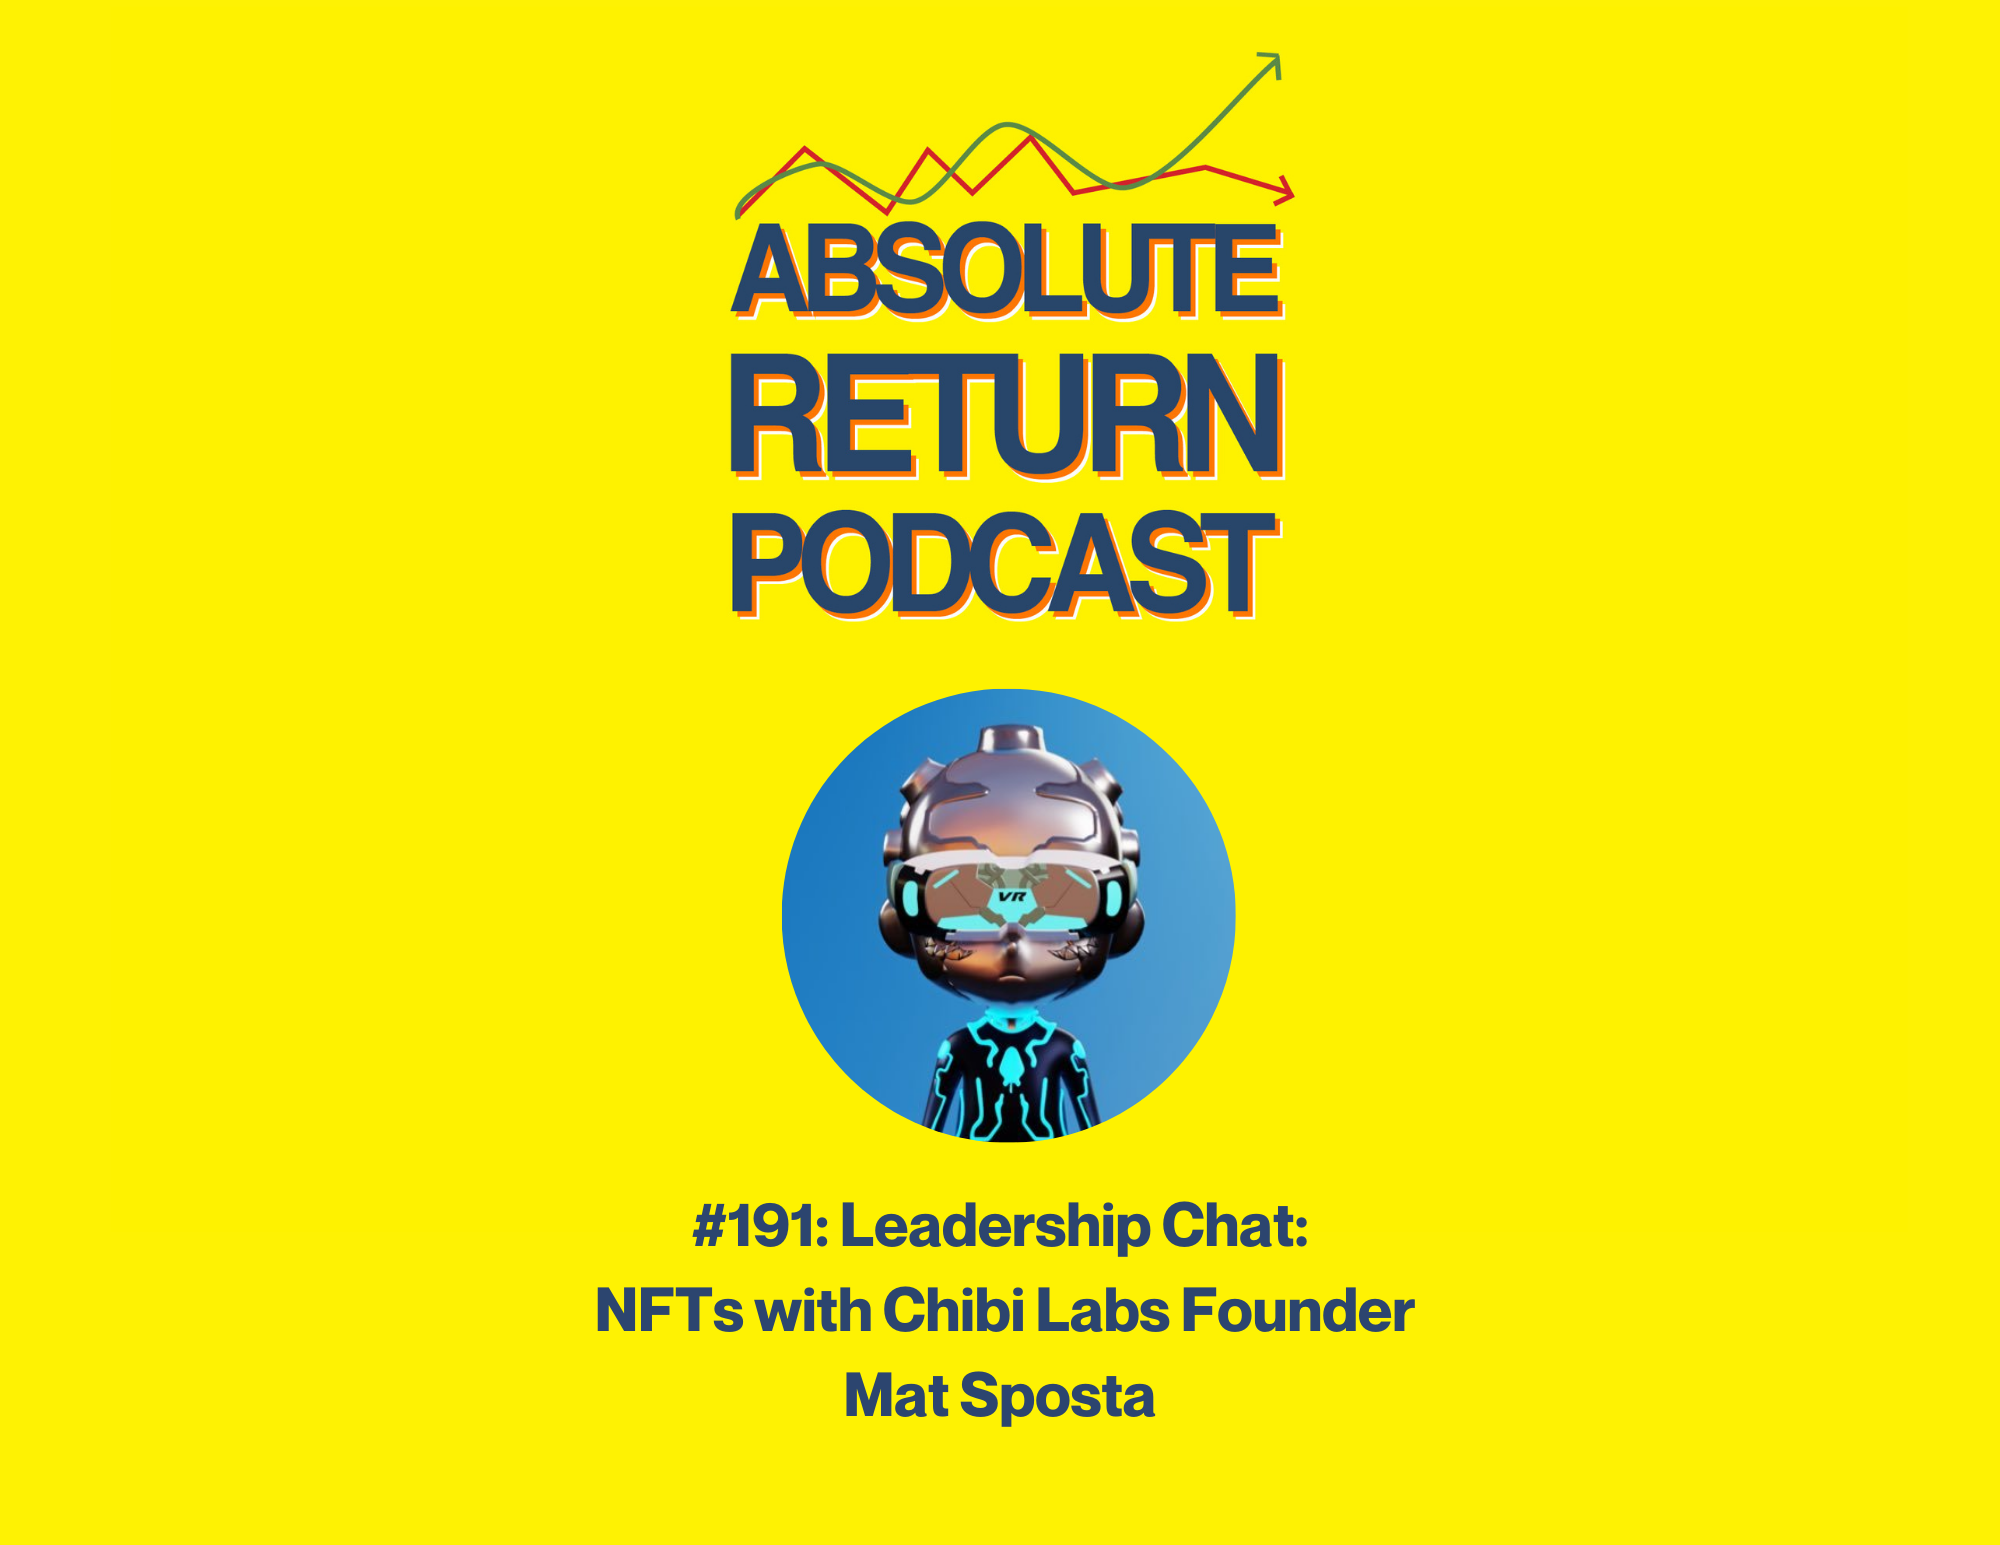 Absolute Return Podcast #191: Leadership Chat: NFTs with Chibi Labs Founder Mat Sposta